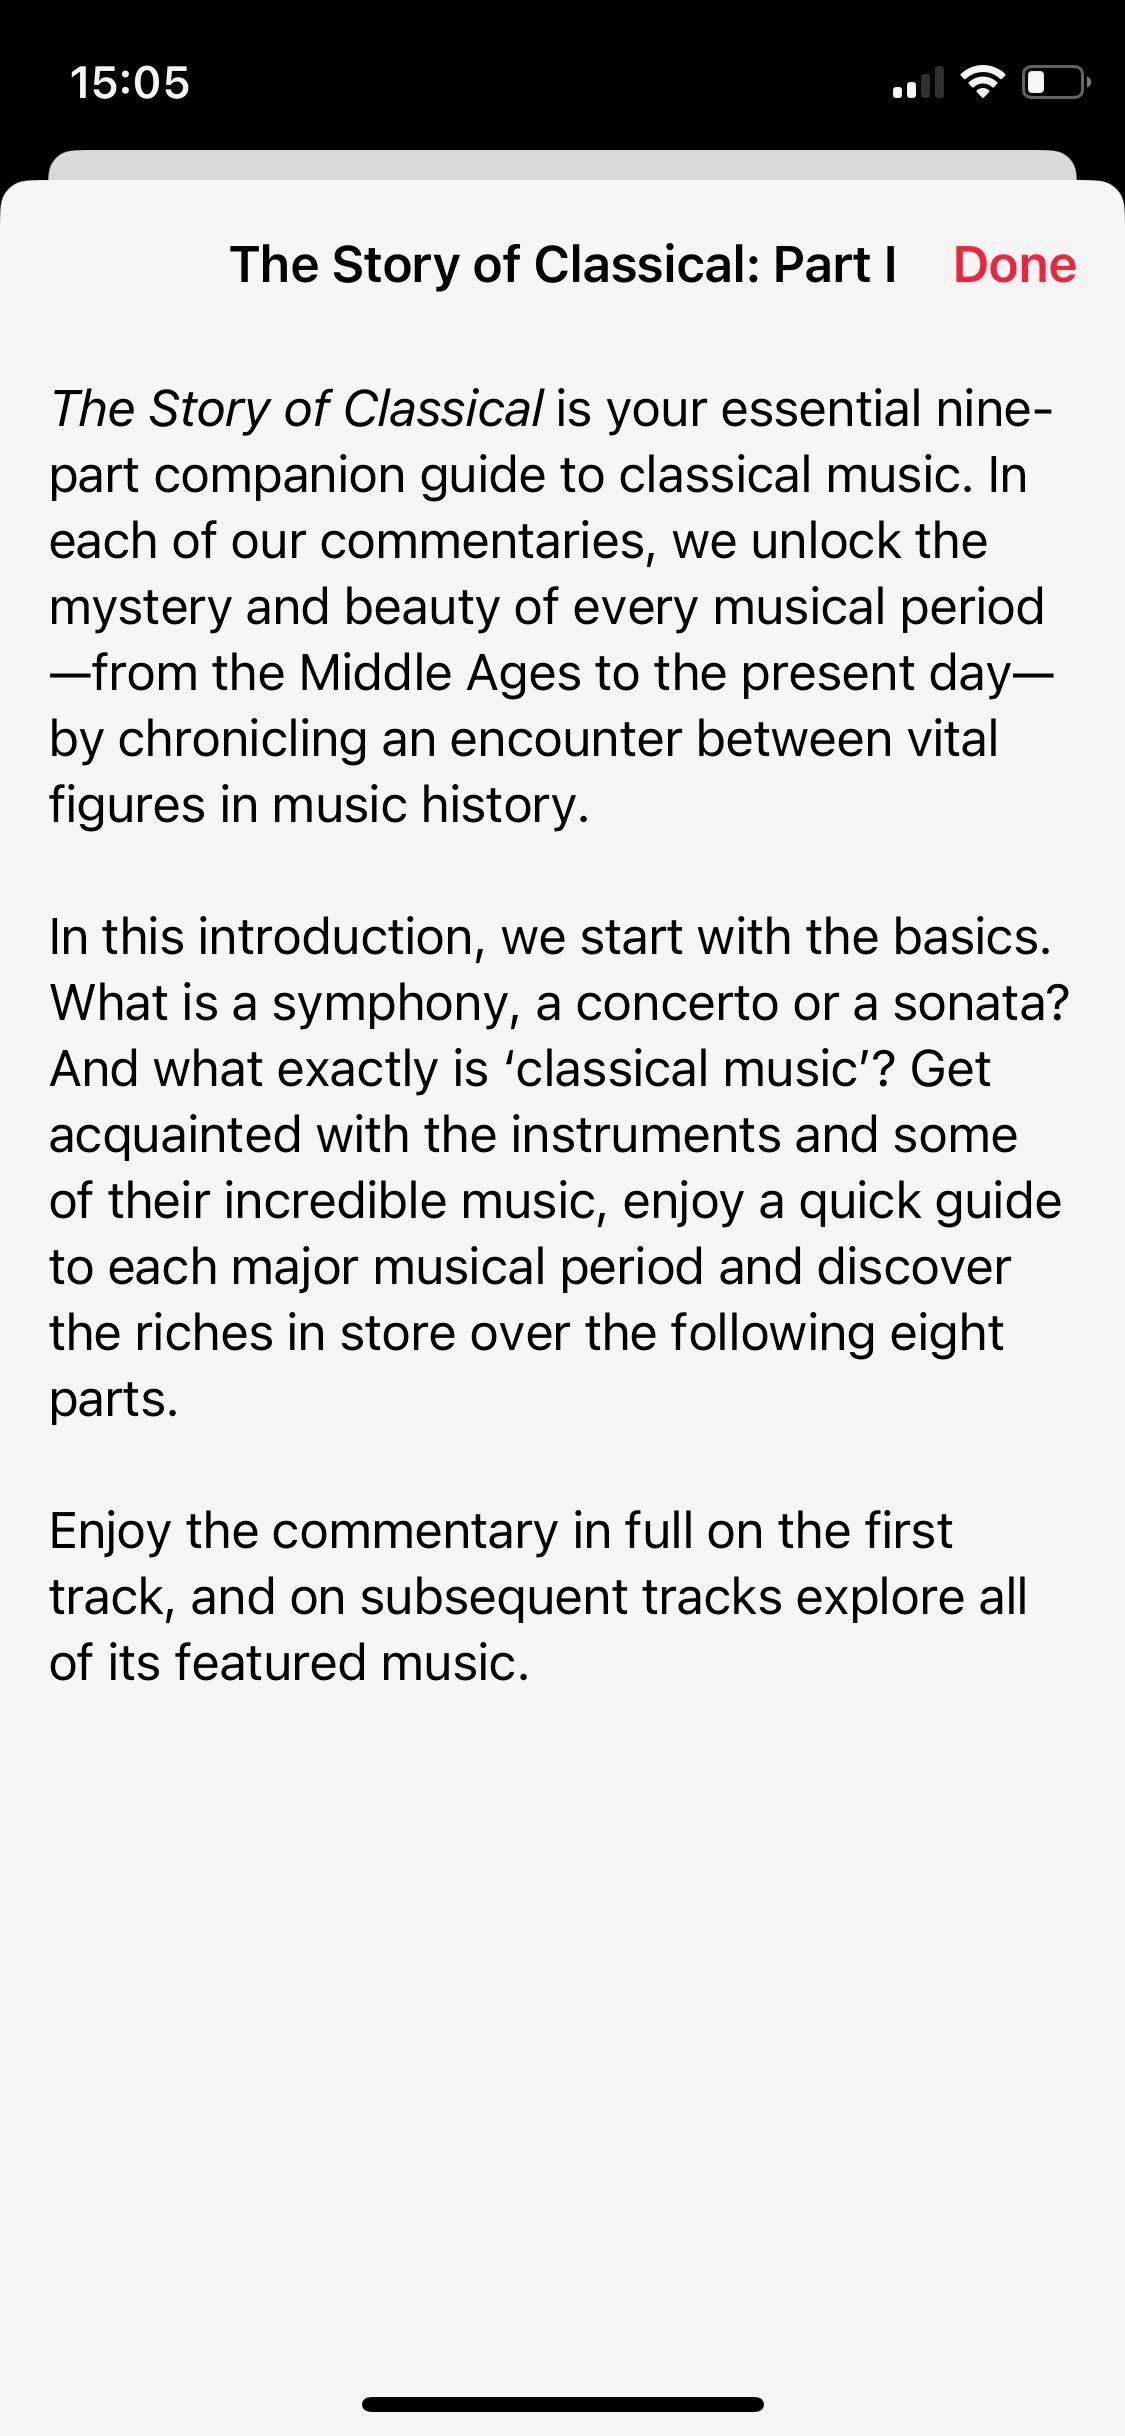 Screenshot of Apple Music Classical The Story of Classical series Part 1 introduction